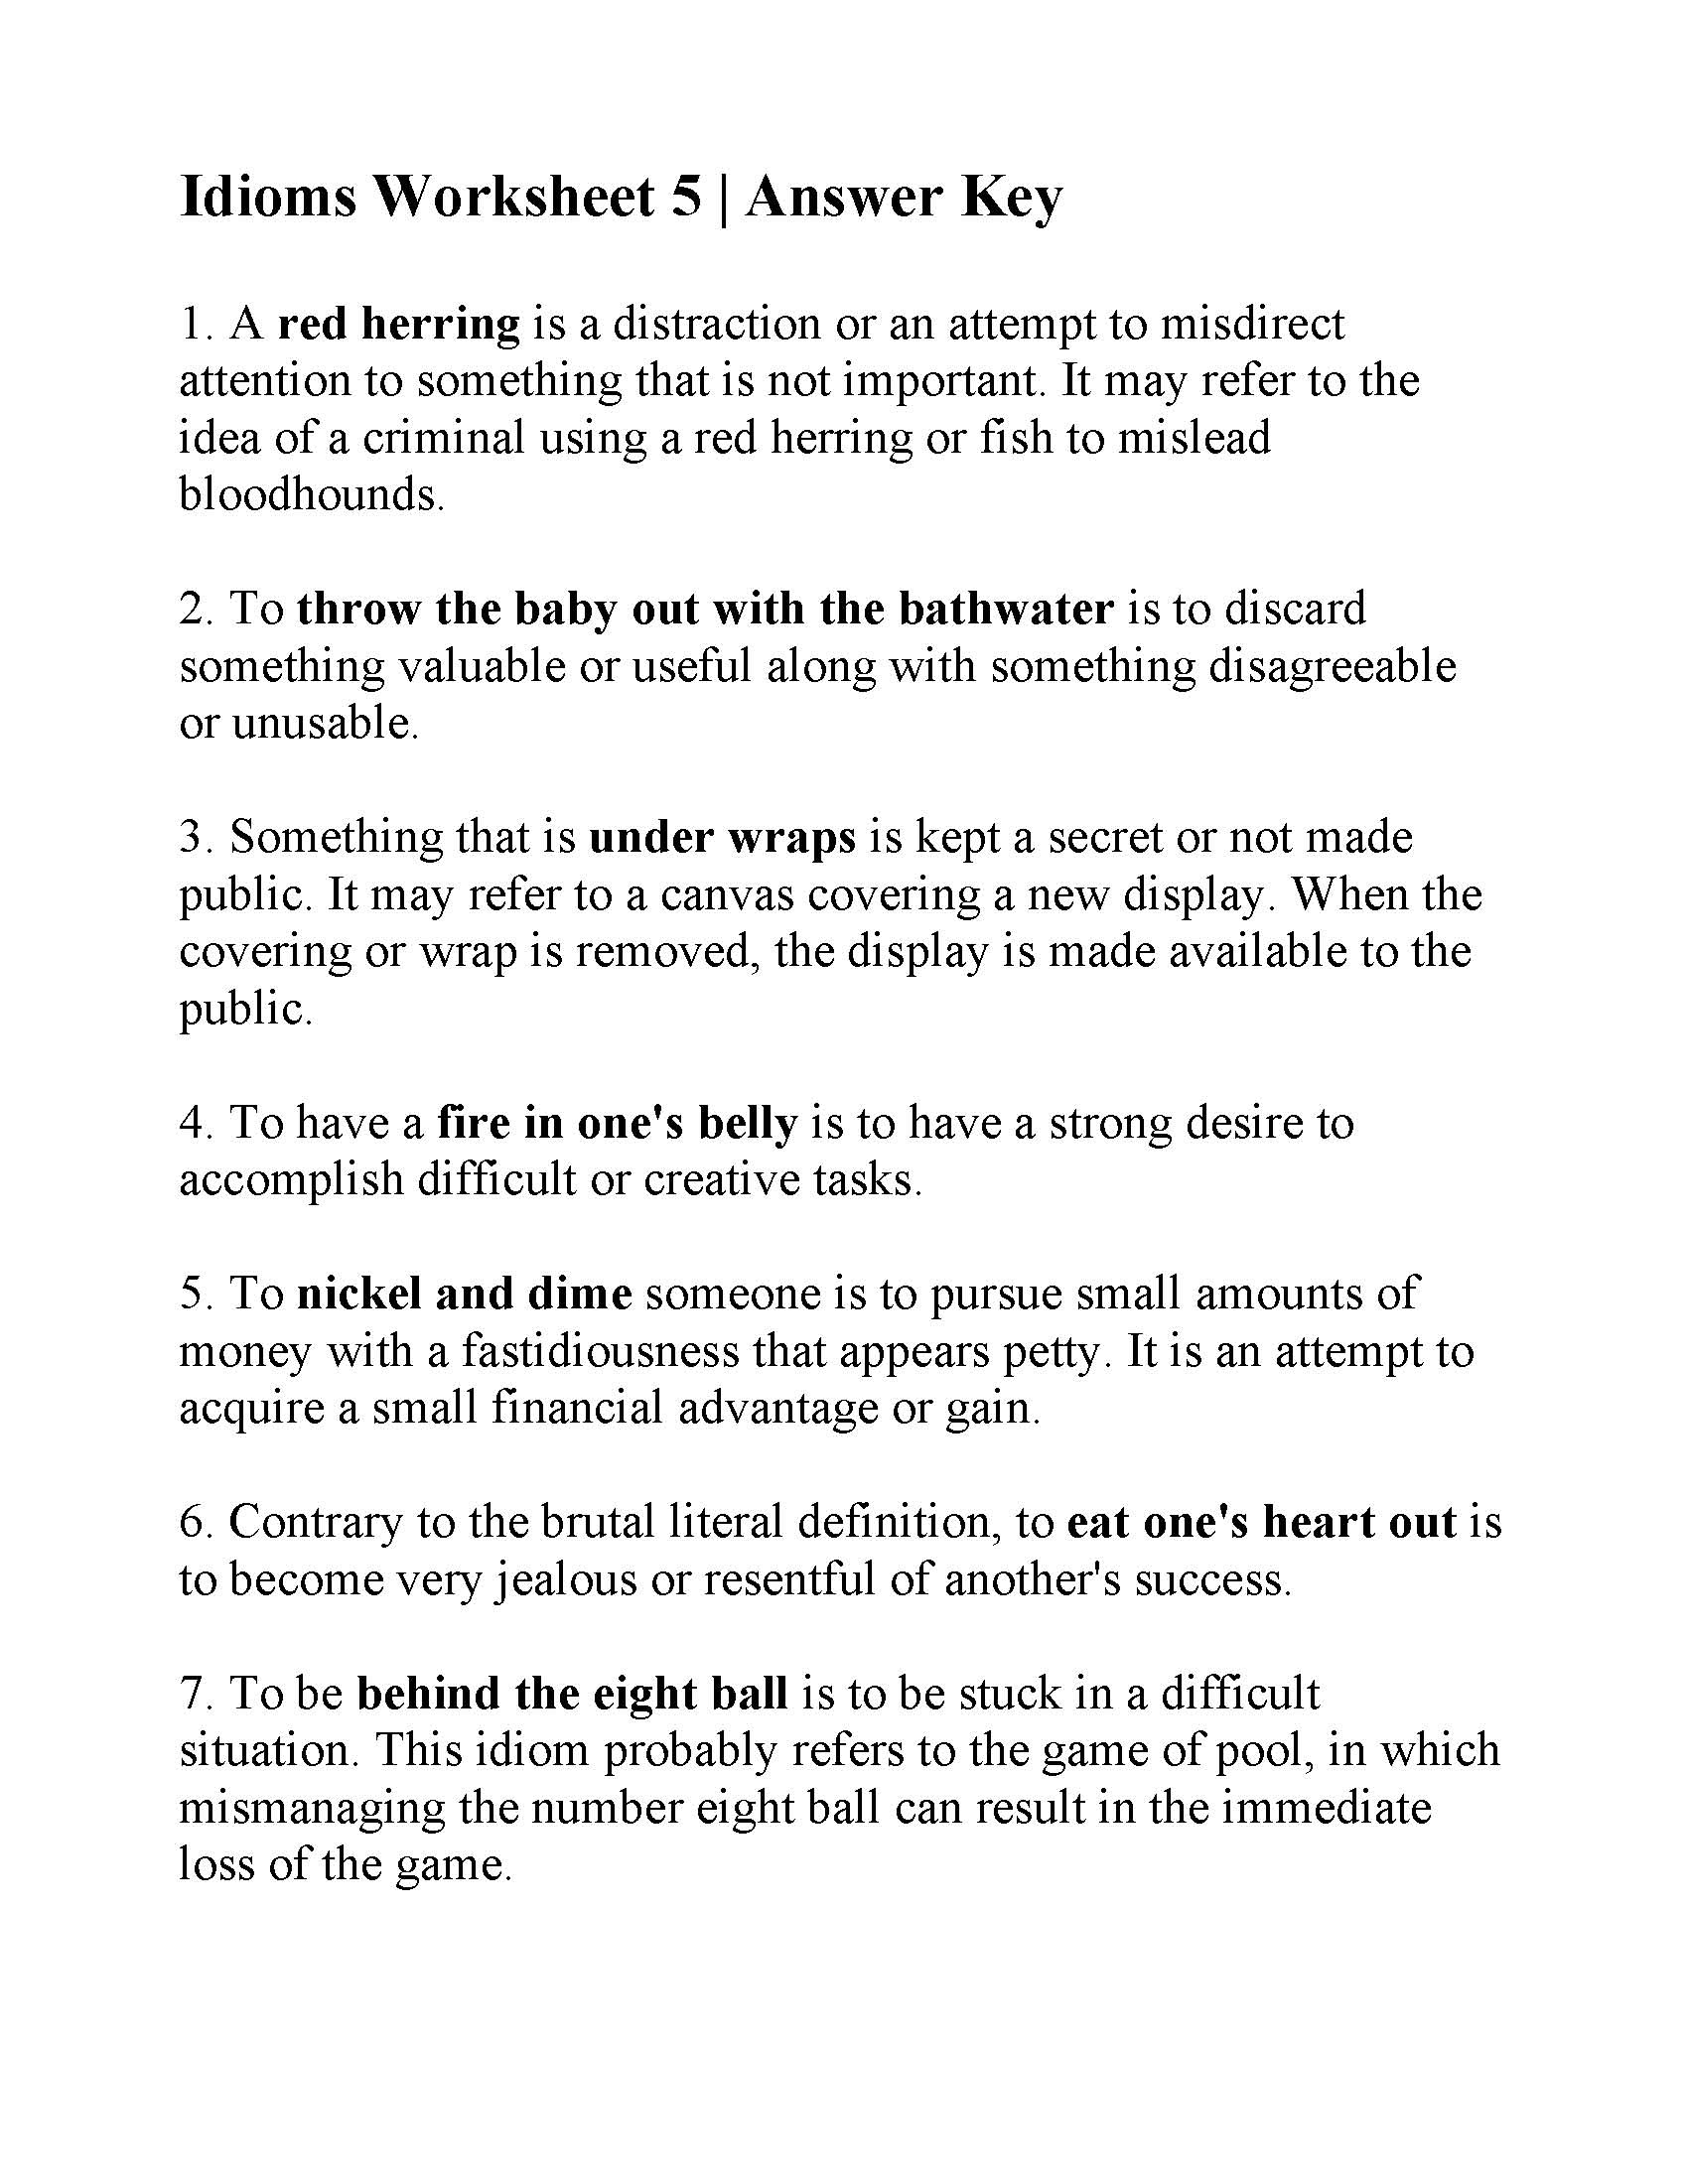 Idioms Worksheet 5 Answers